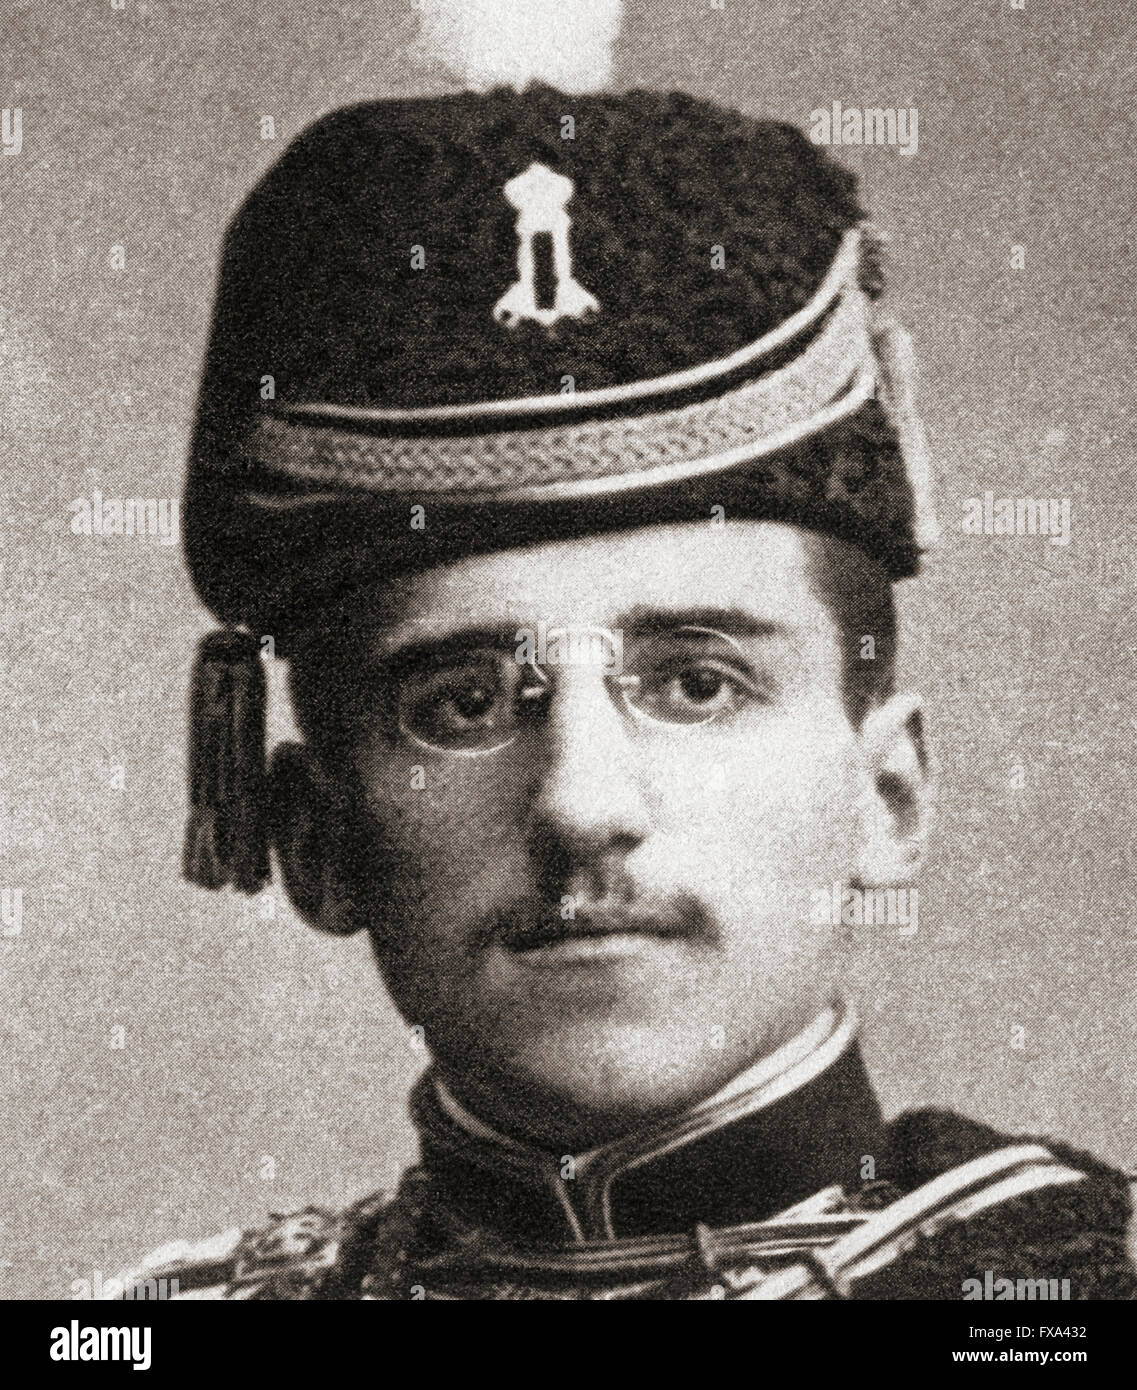 Alexander I, aka Alexander the Unifier, 1888 - 1934.  Prince regent of the Kingdom of Serbia from 1914 and later King of Yugoslavia from 1921 to 1934. Stock Photo